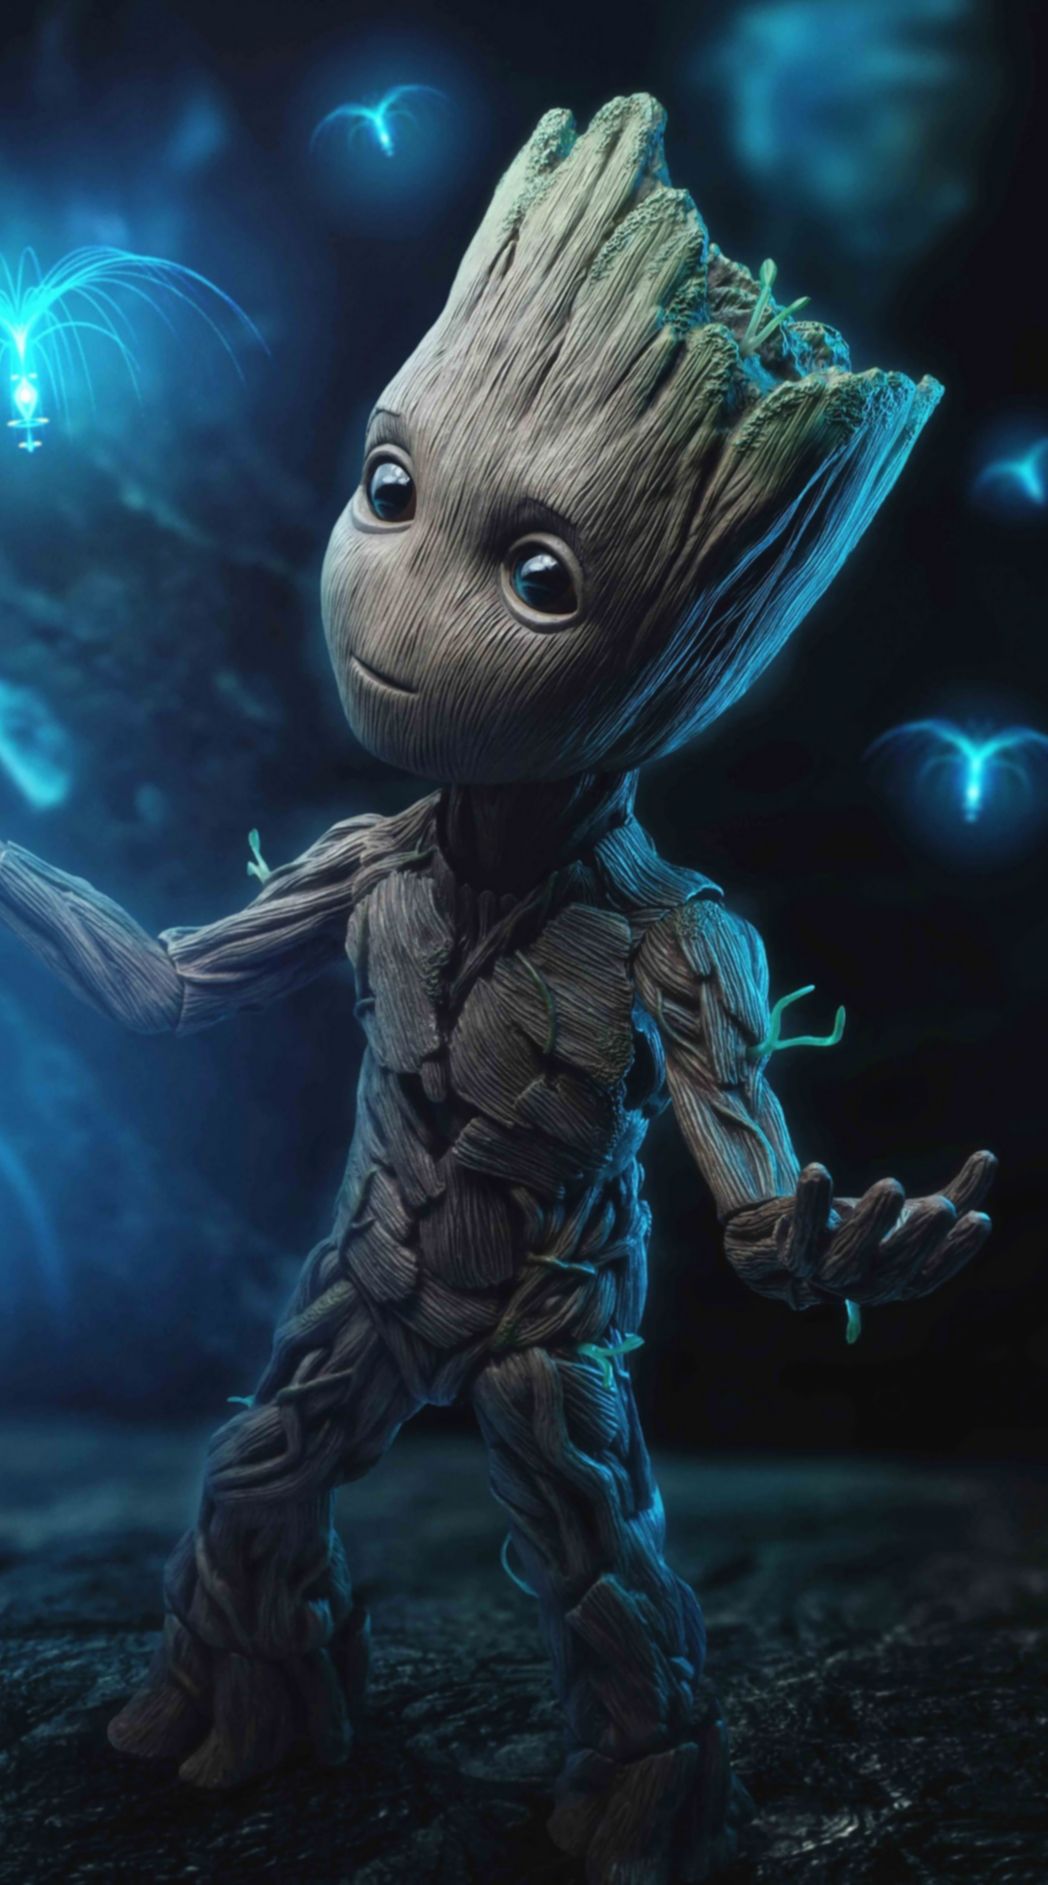 Baby Groot Mobile HQ Wallpaper #wallpaper #iphone #hd. :)O O